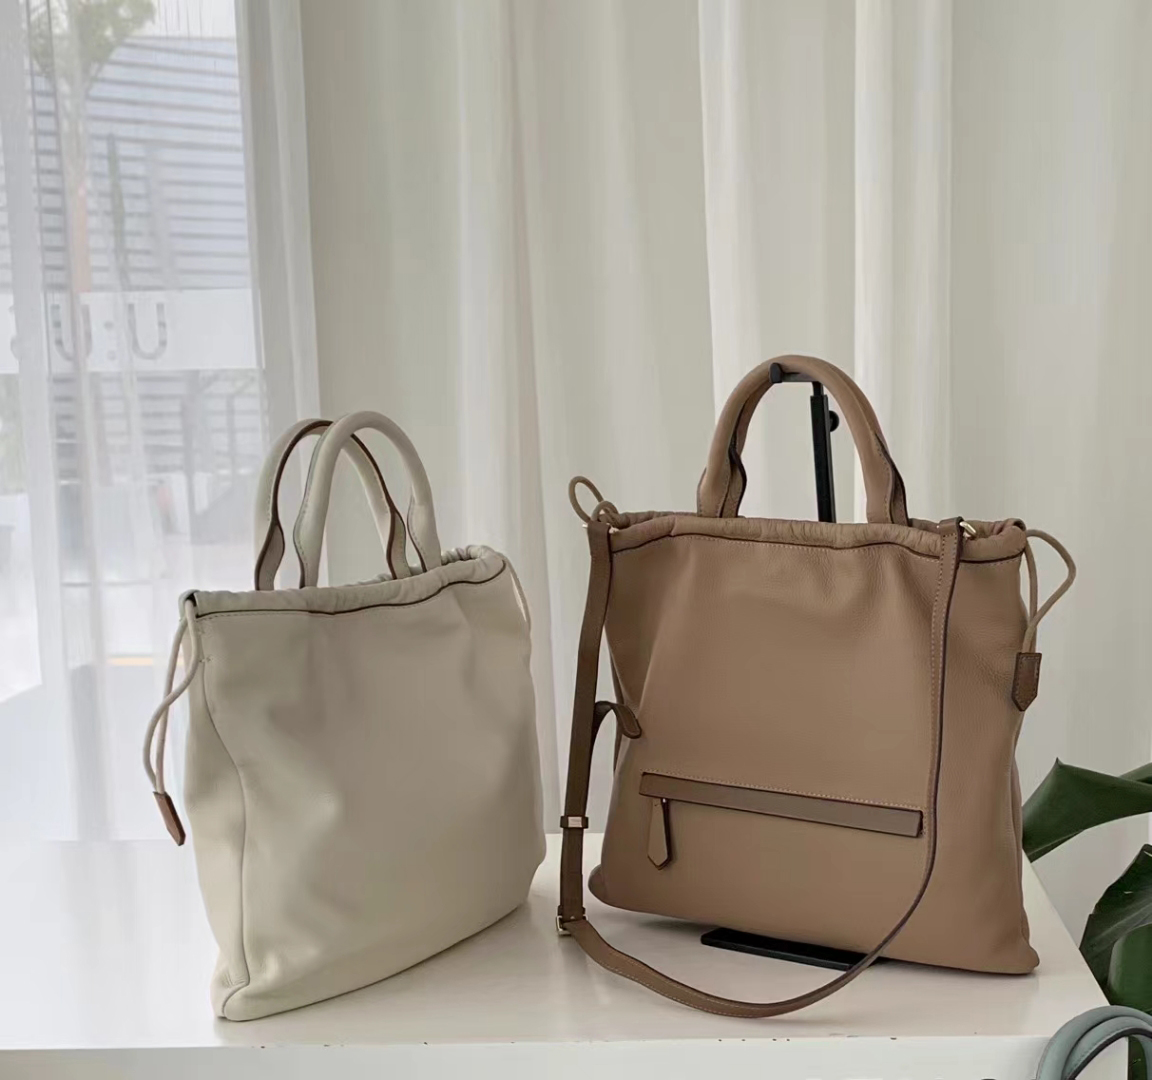 Soft leather tote bag